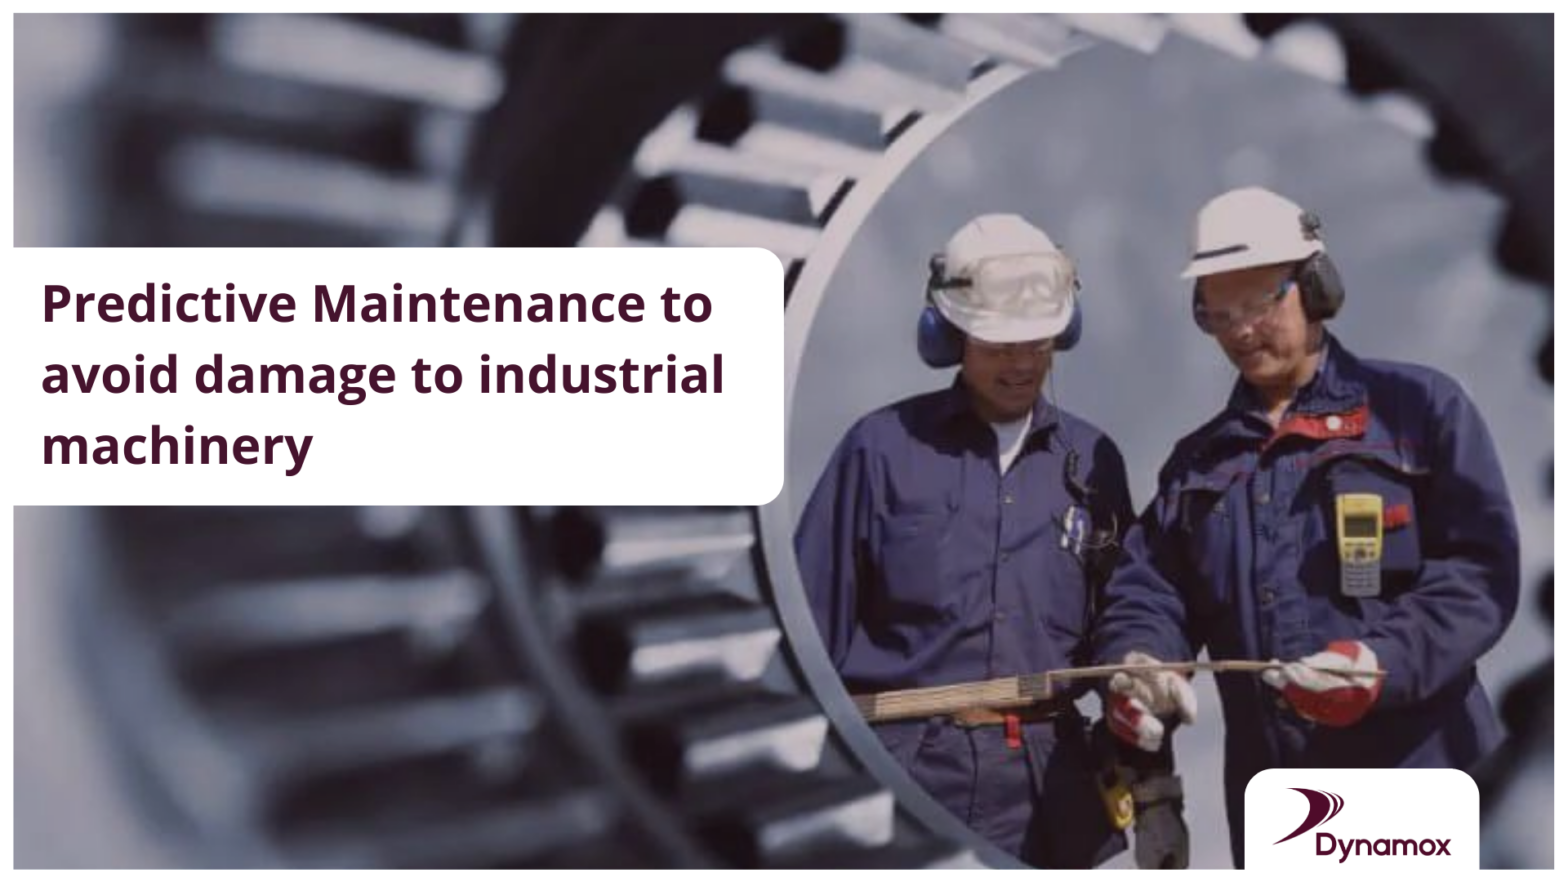 Predictive Maintenance to avoid damage to industrial machinery